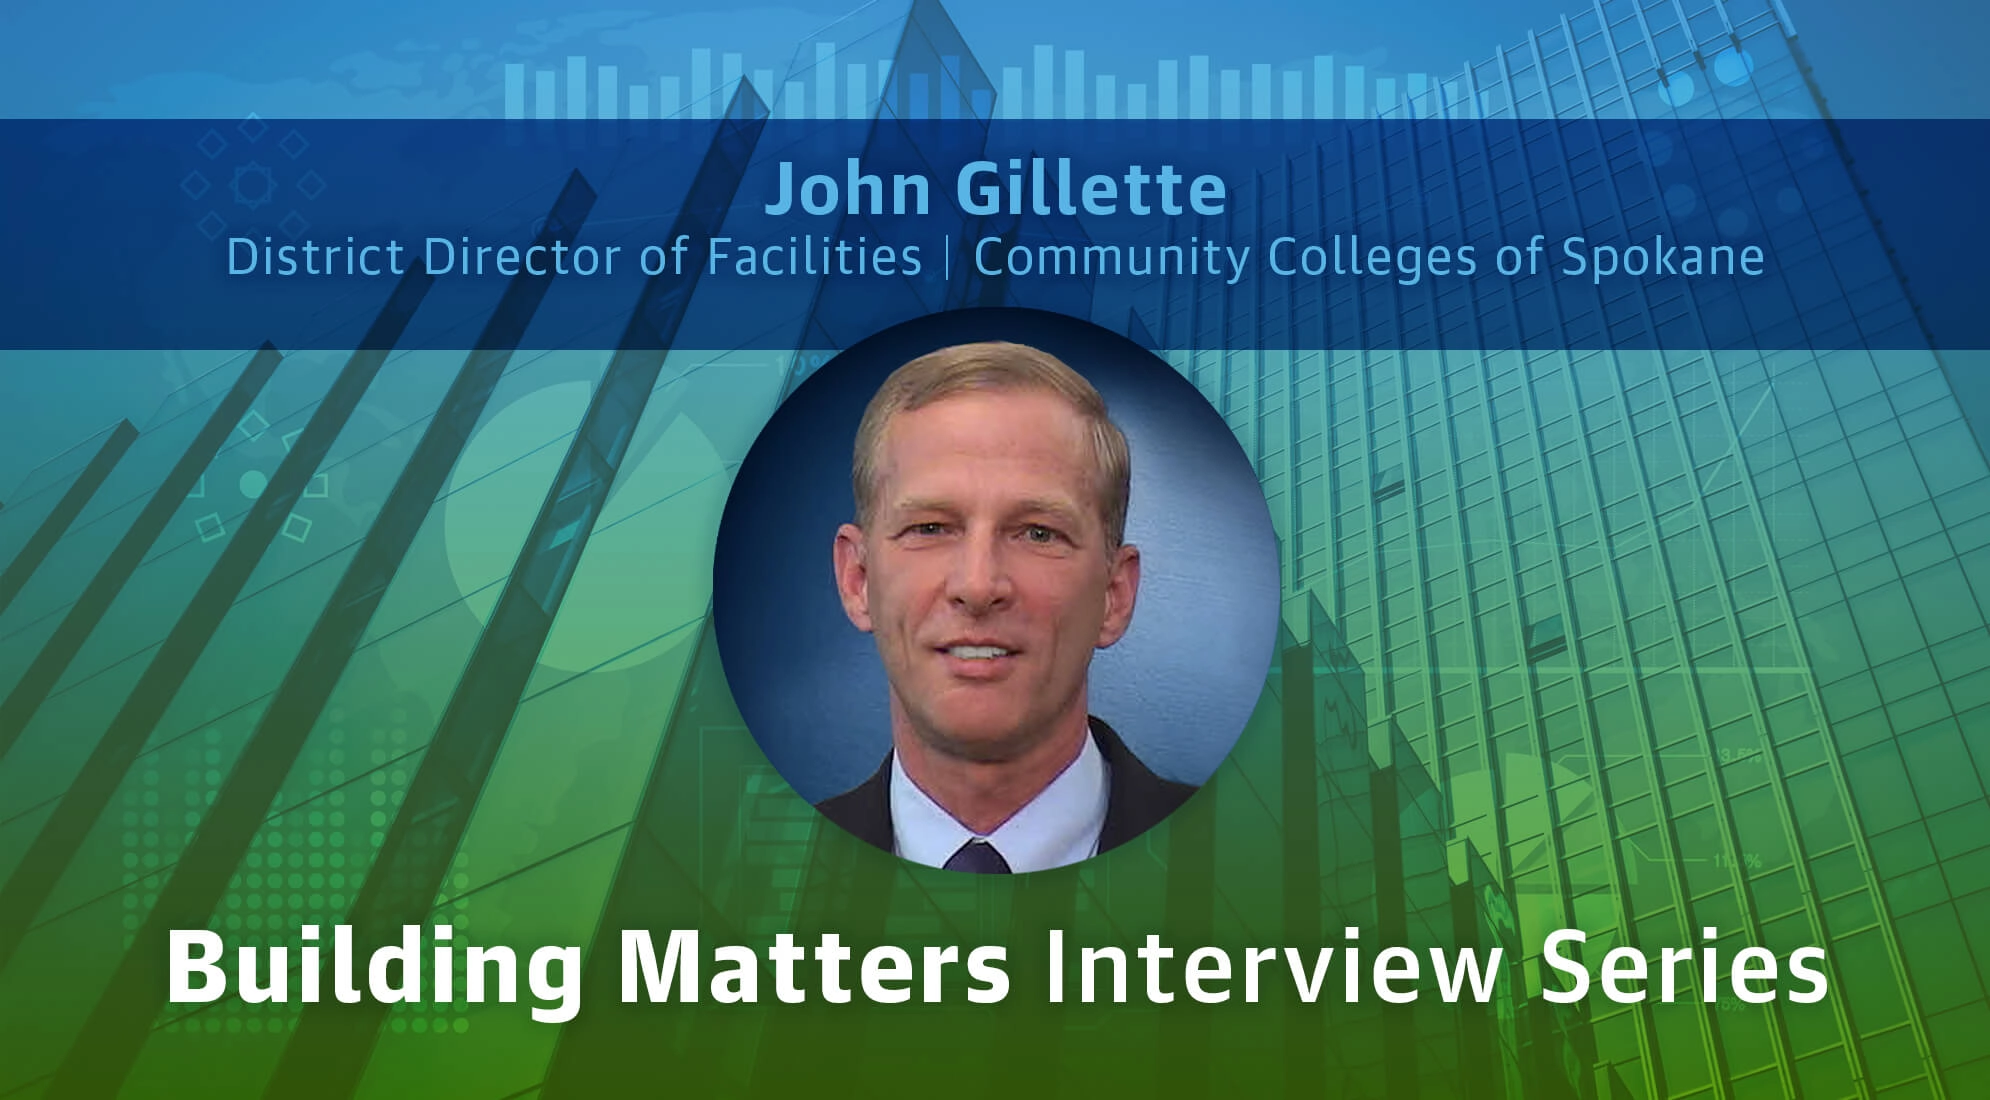 Community College Facilities Insights from John Gillette 3